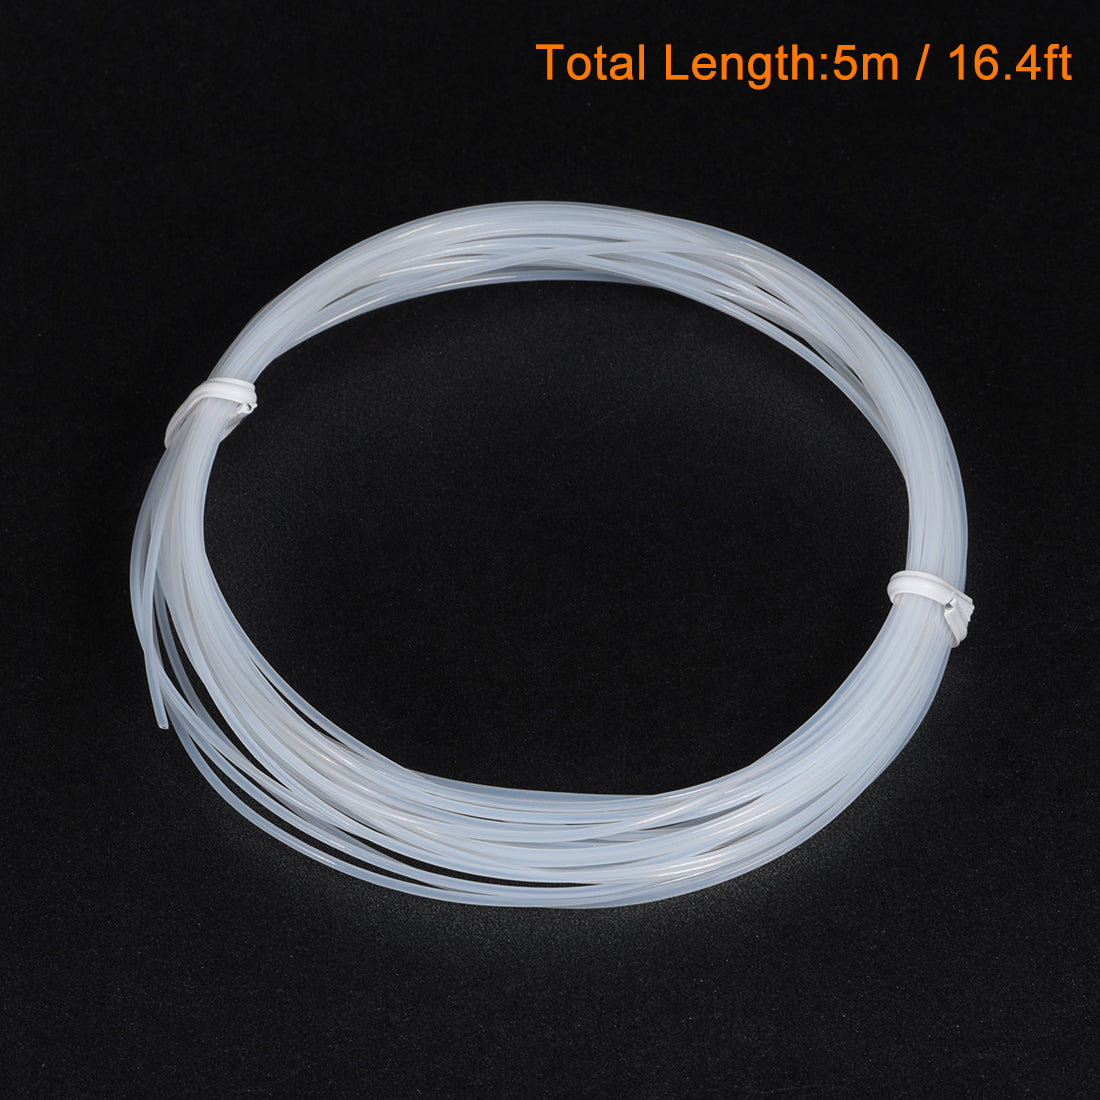 uxcell Uxcell PTFE Tube Tubing 5Meter 16.4ft Lengh Pipe 0.6mm ID 1mm OD for 3D Printer RepRap